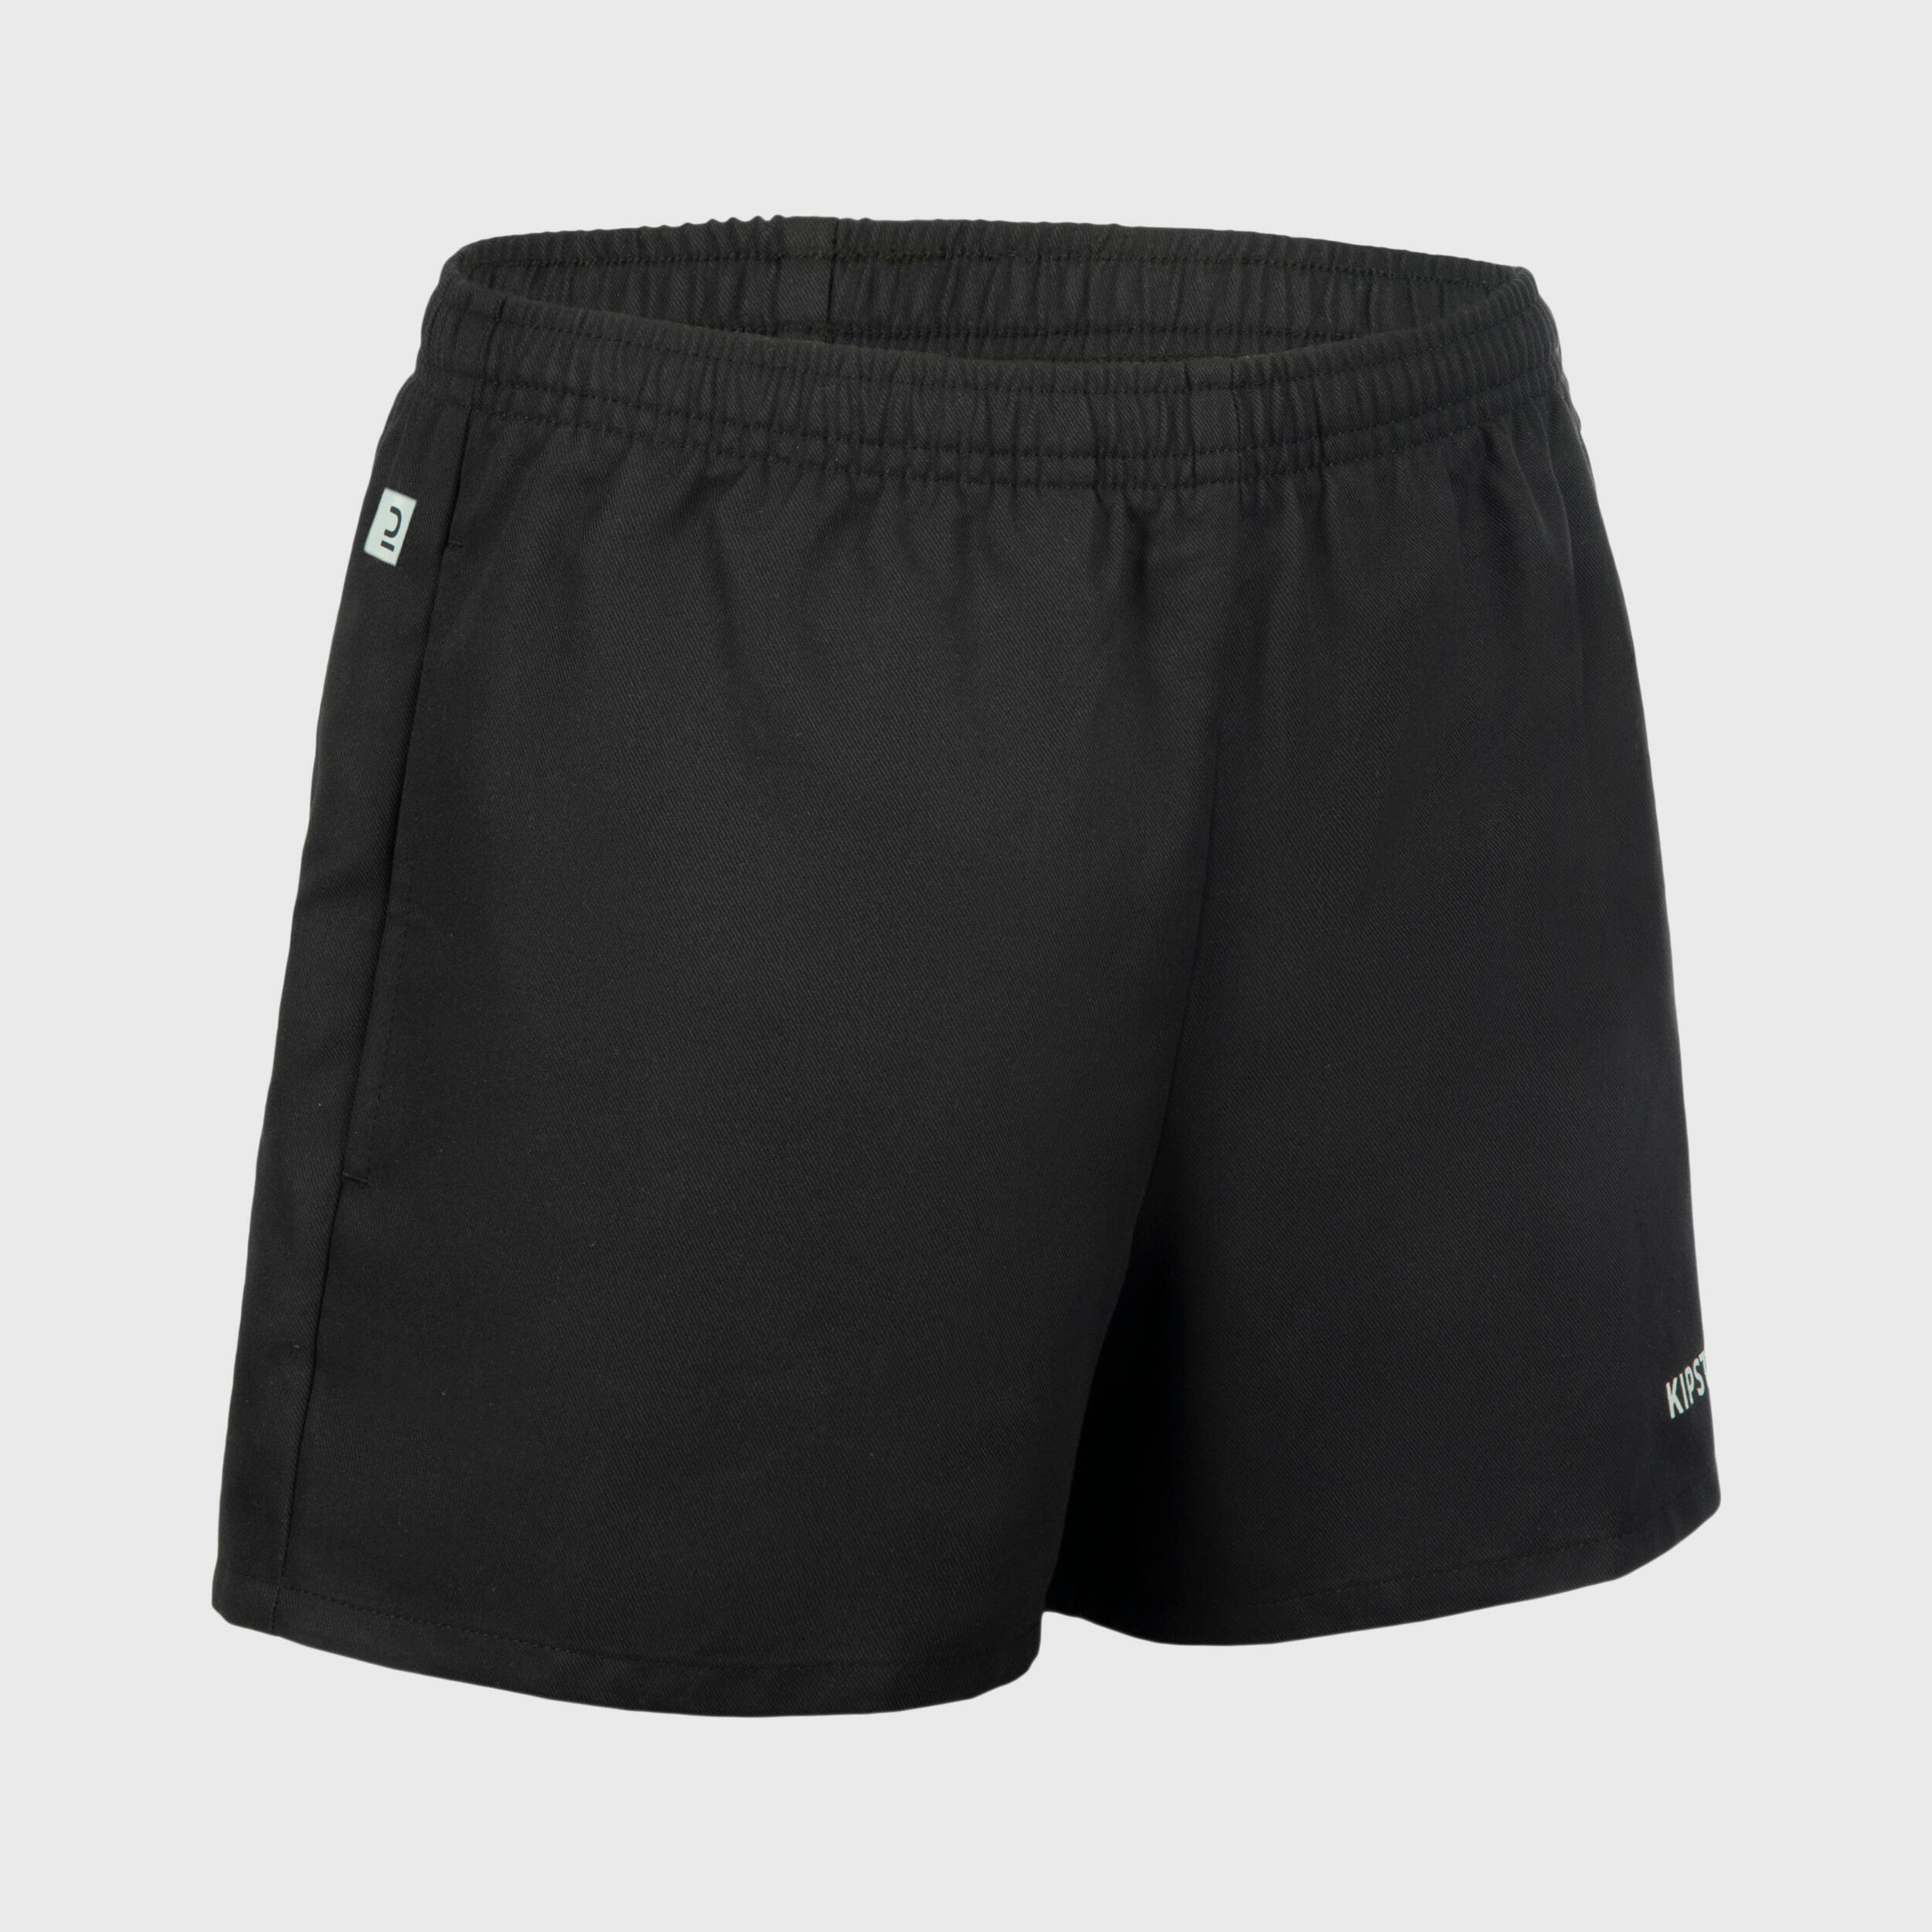 Adult Rugby Shorts with Pockets R100 - Black 1/6